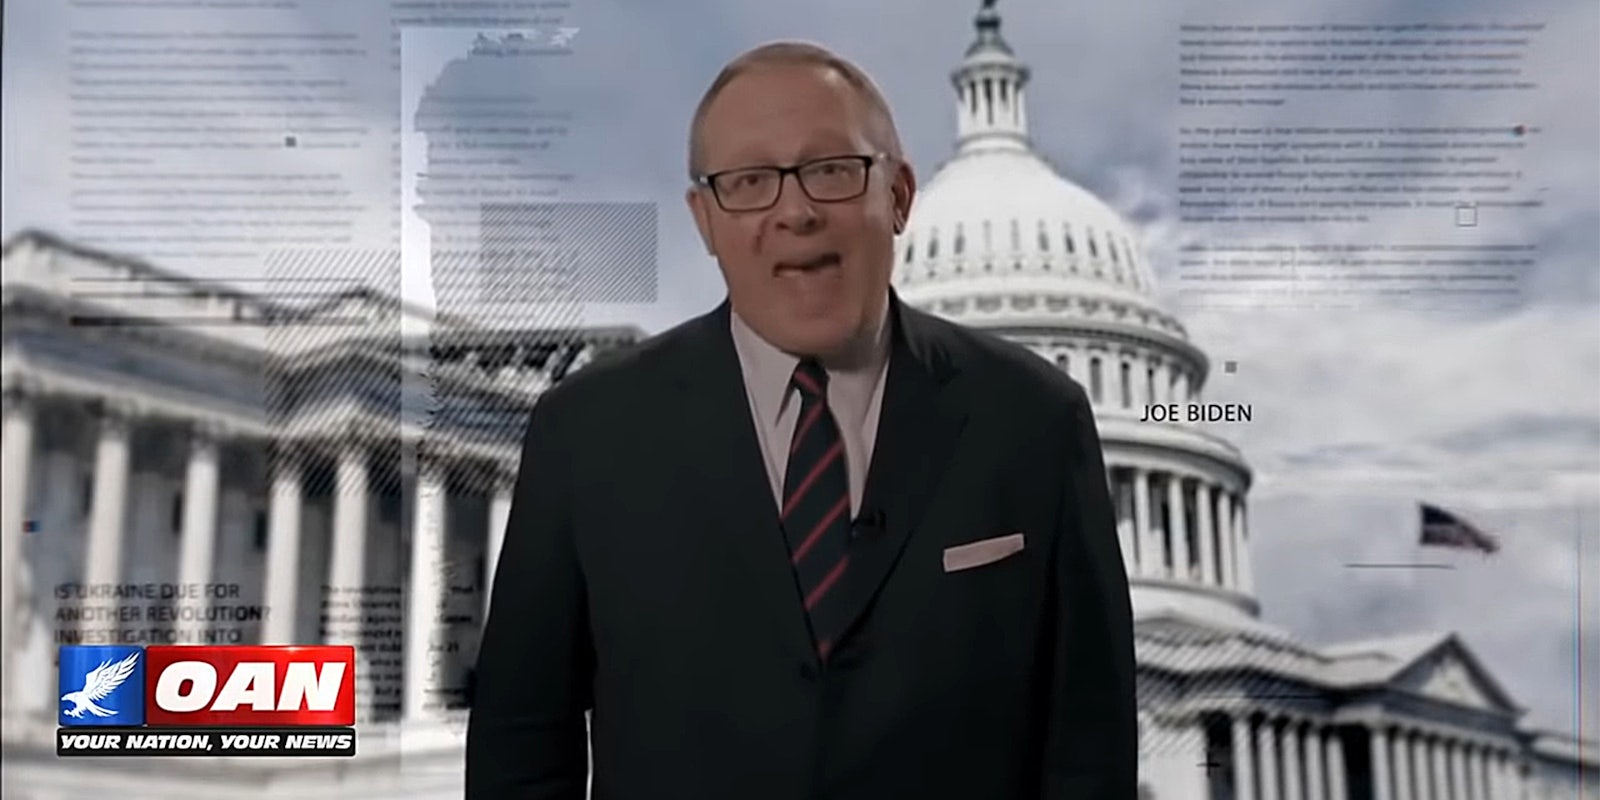 Man speaking in front of US Capitol backdrop with OAN logo